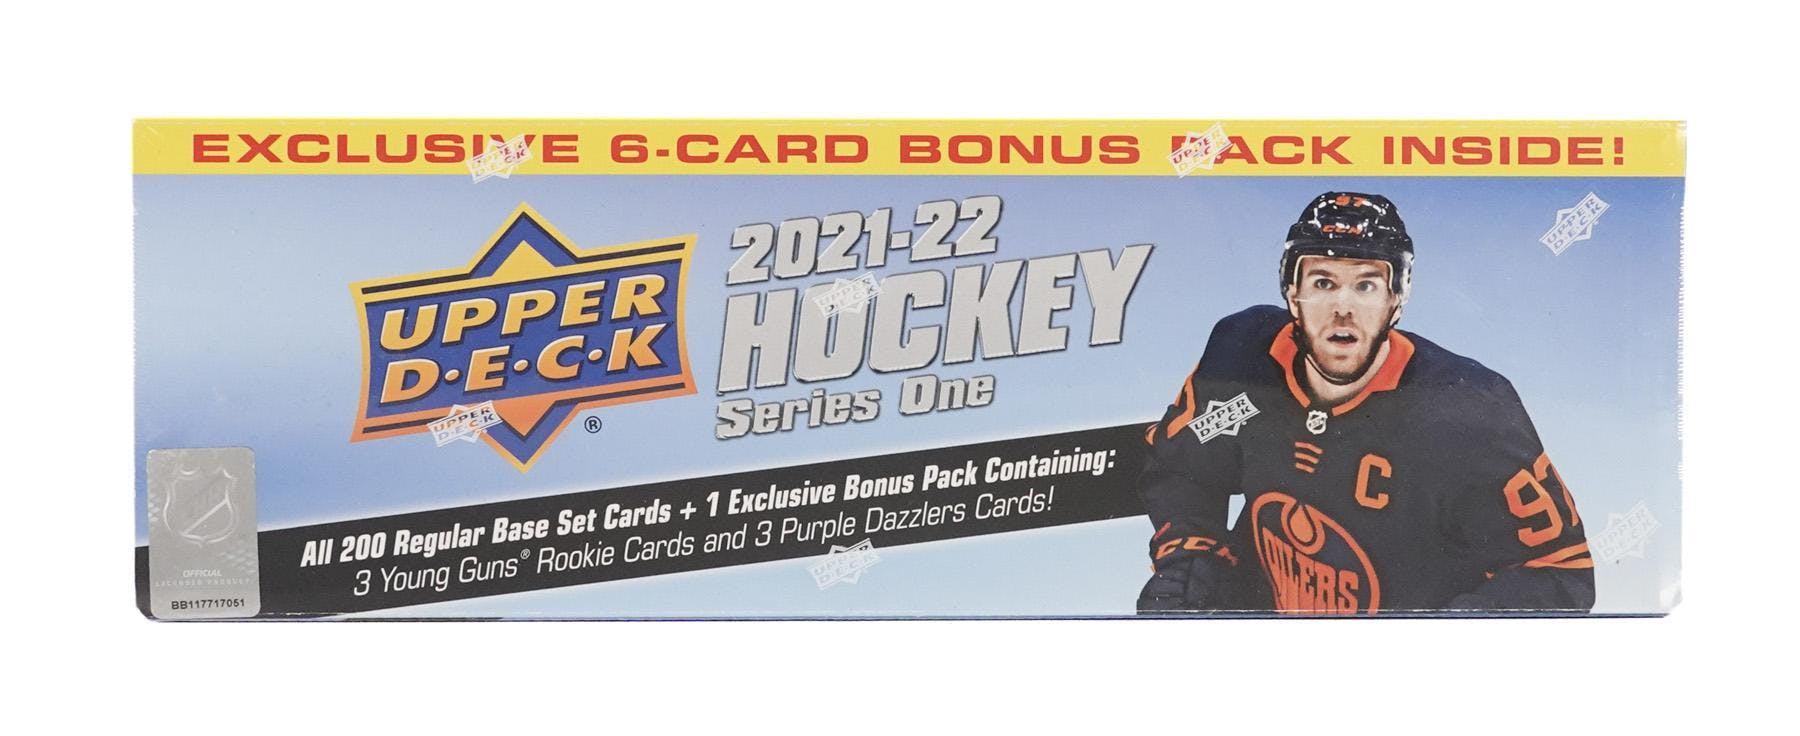 2021/22 Upper Deck Series One Hockey Complete 200-Card Factory Set with Bonus Pack - Fanatics Exclusive